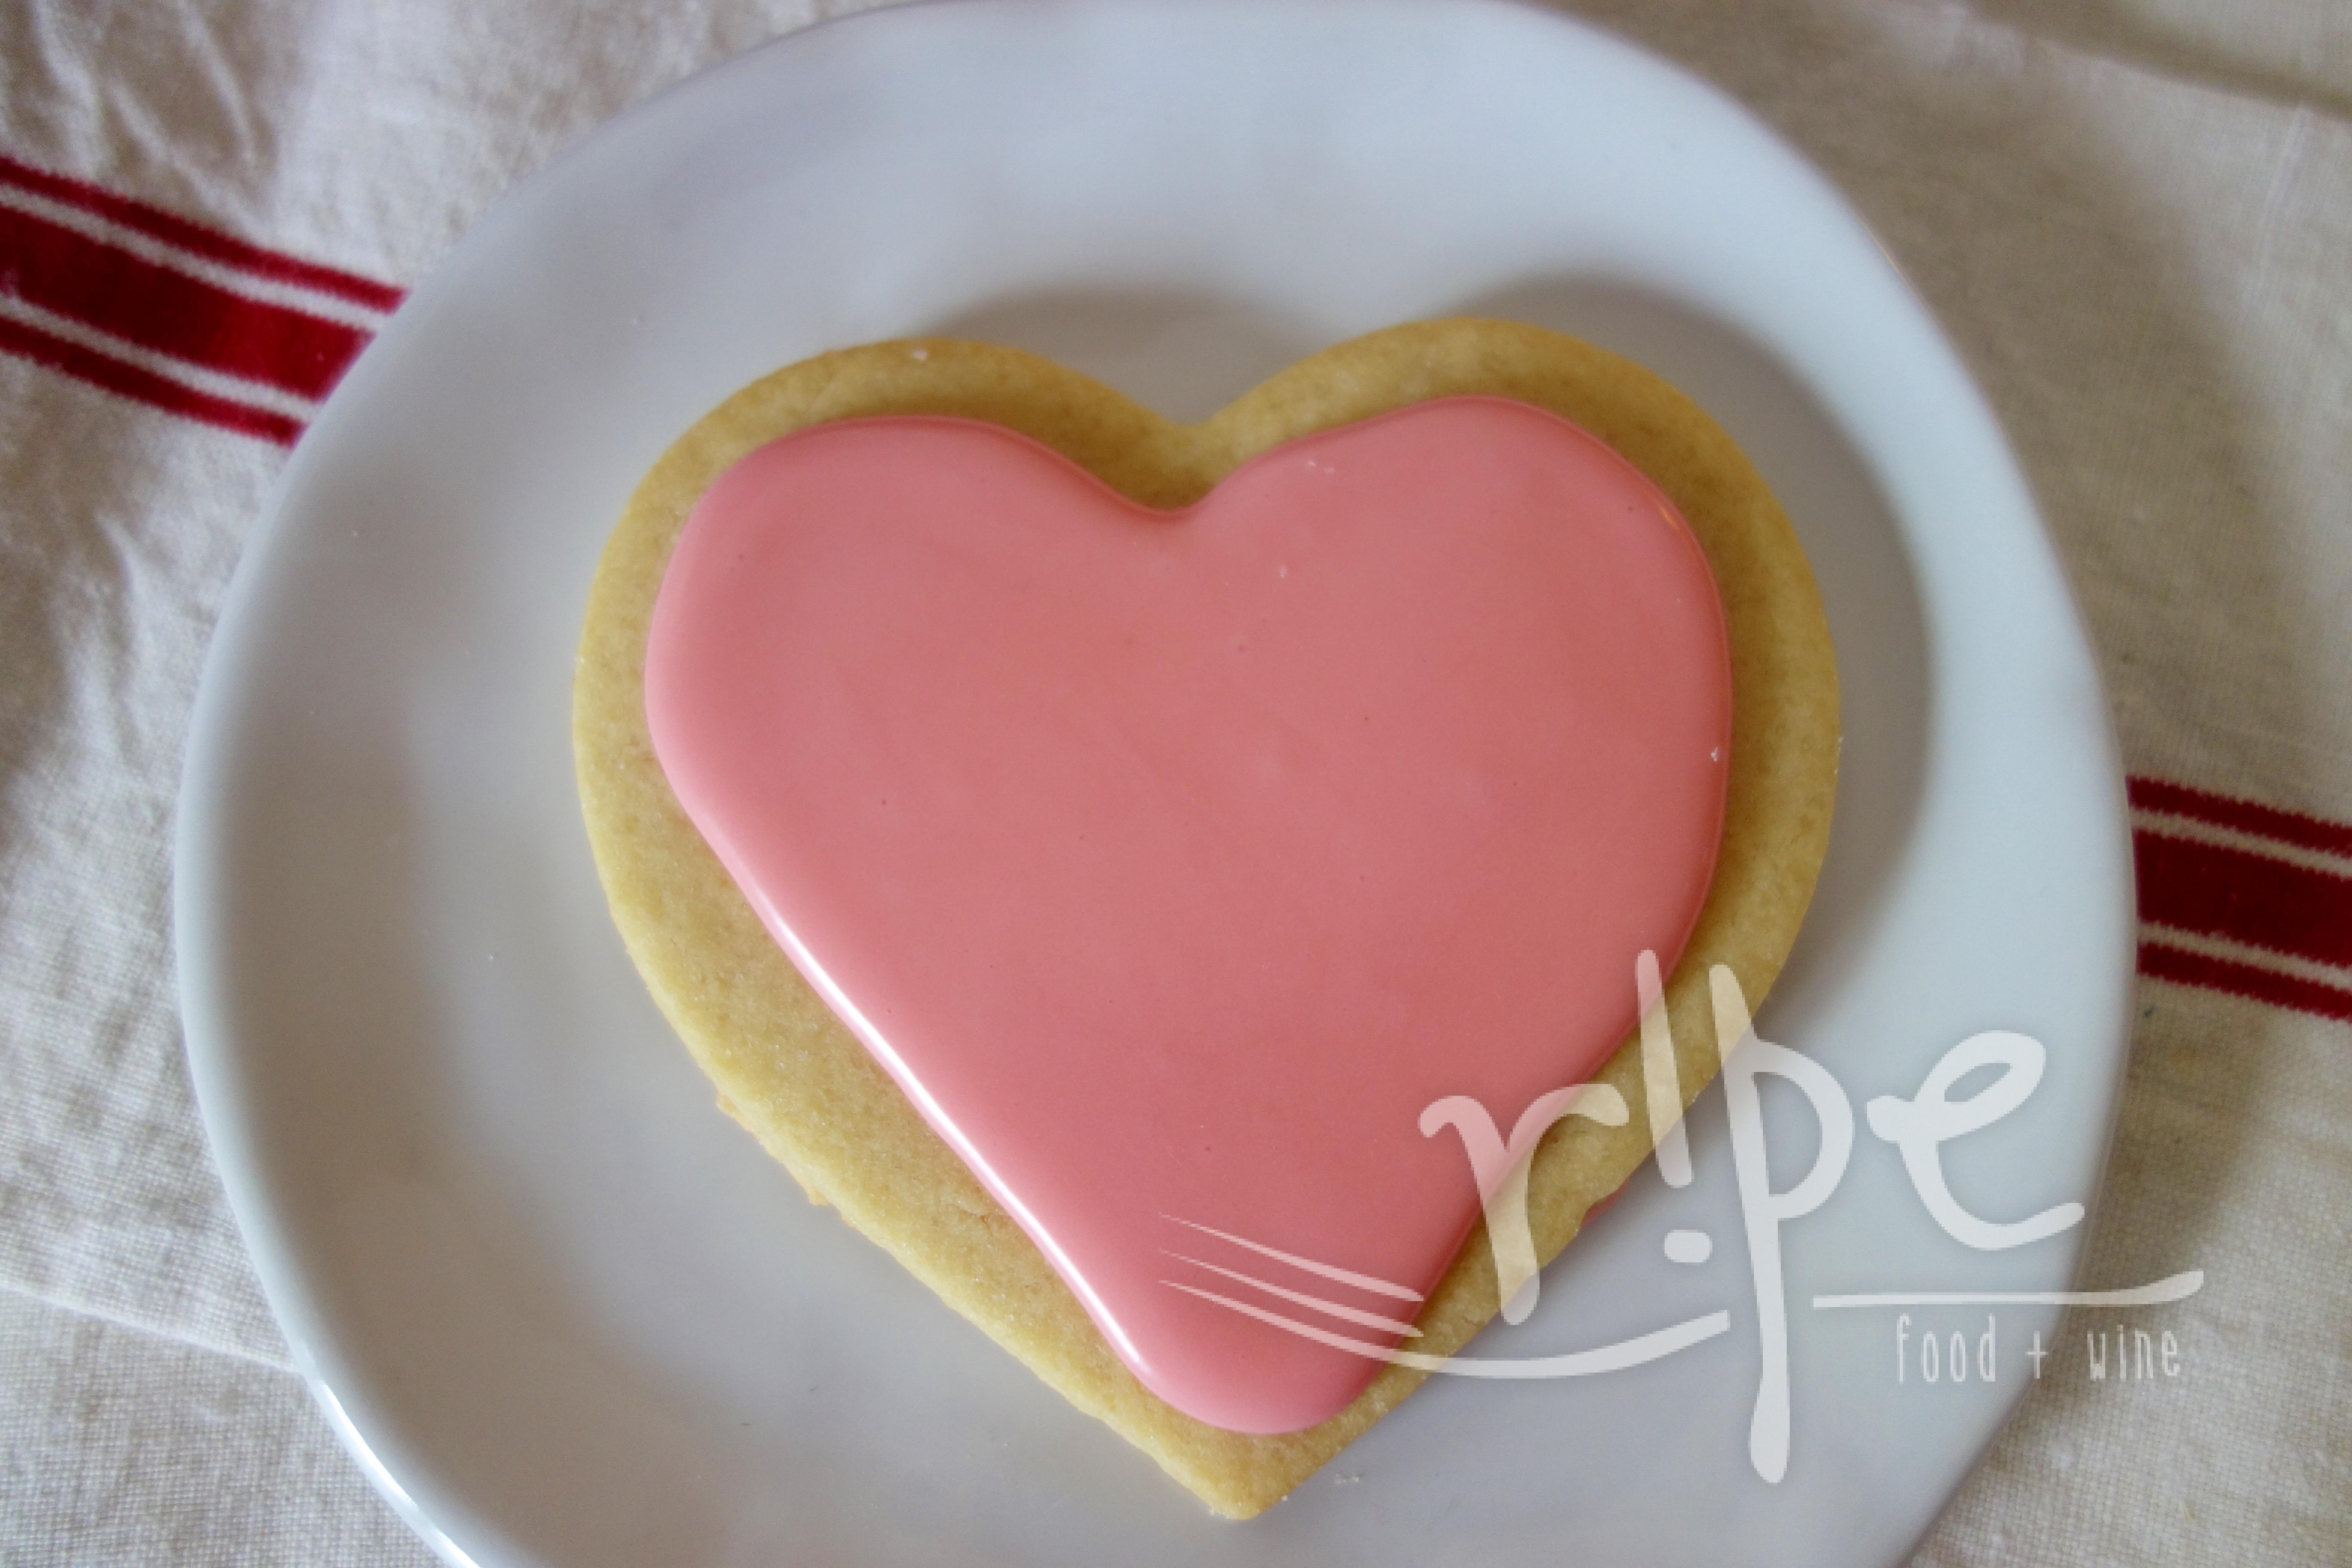 Sugar Cookies with Icing